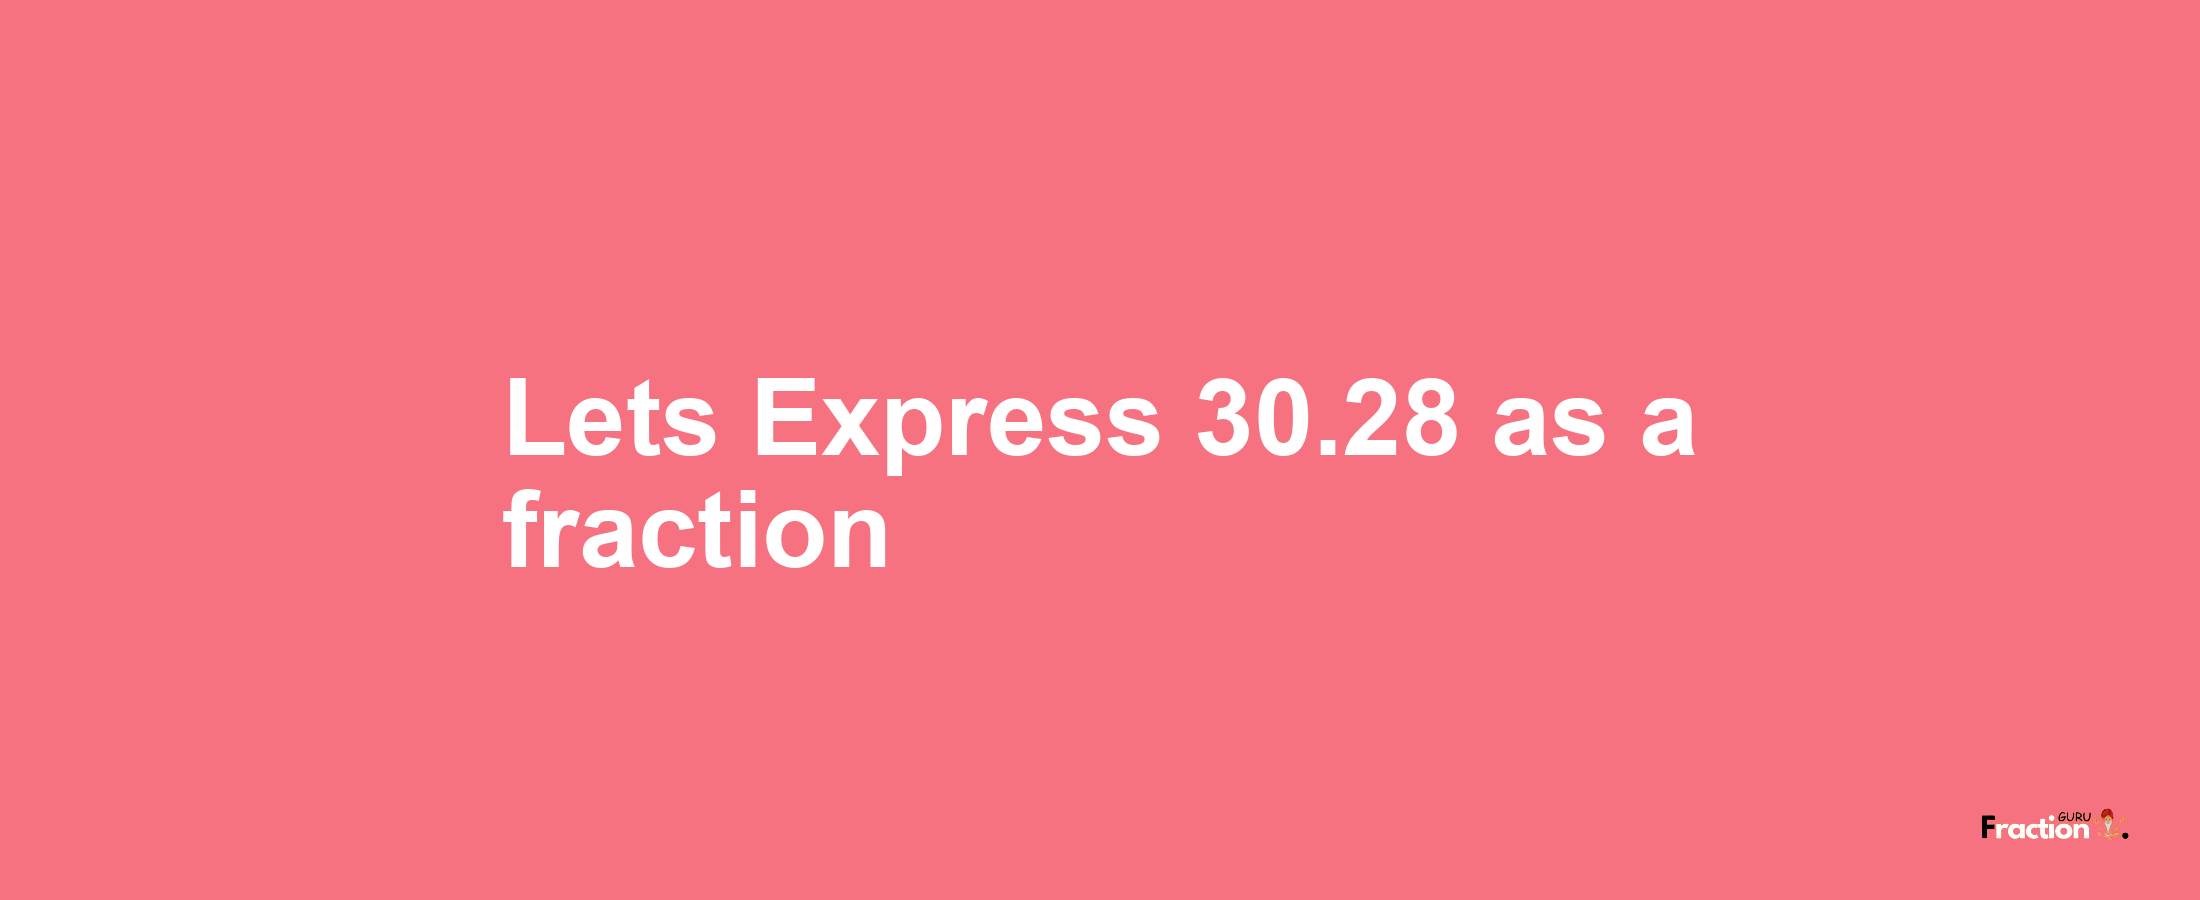 Lets Express 30.28 as afraction